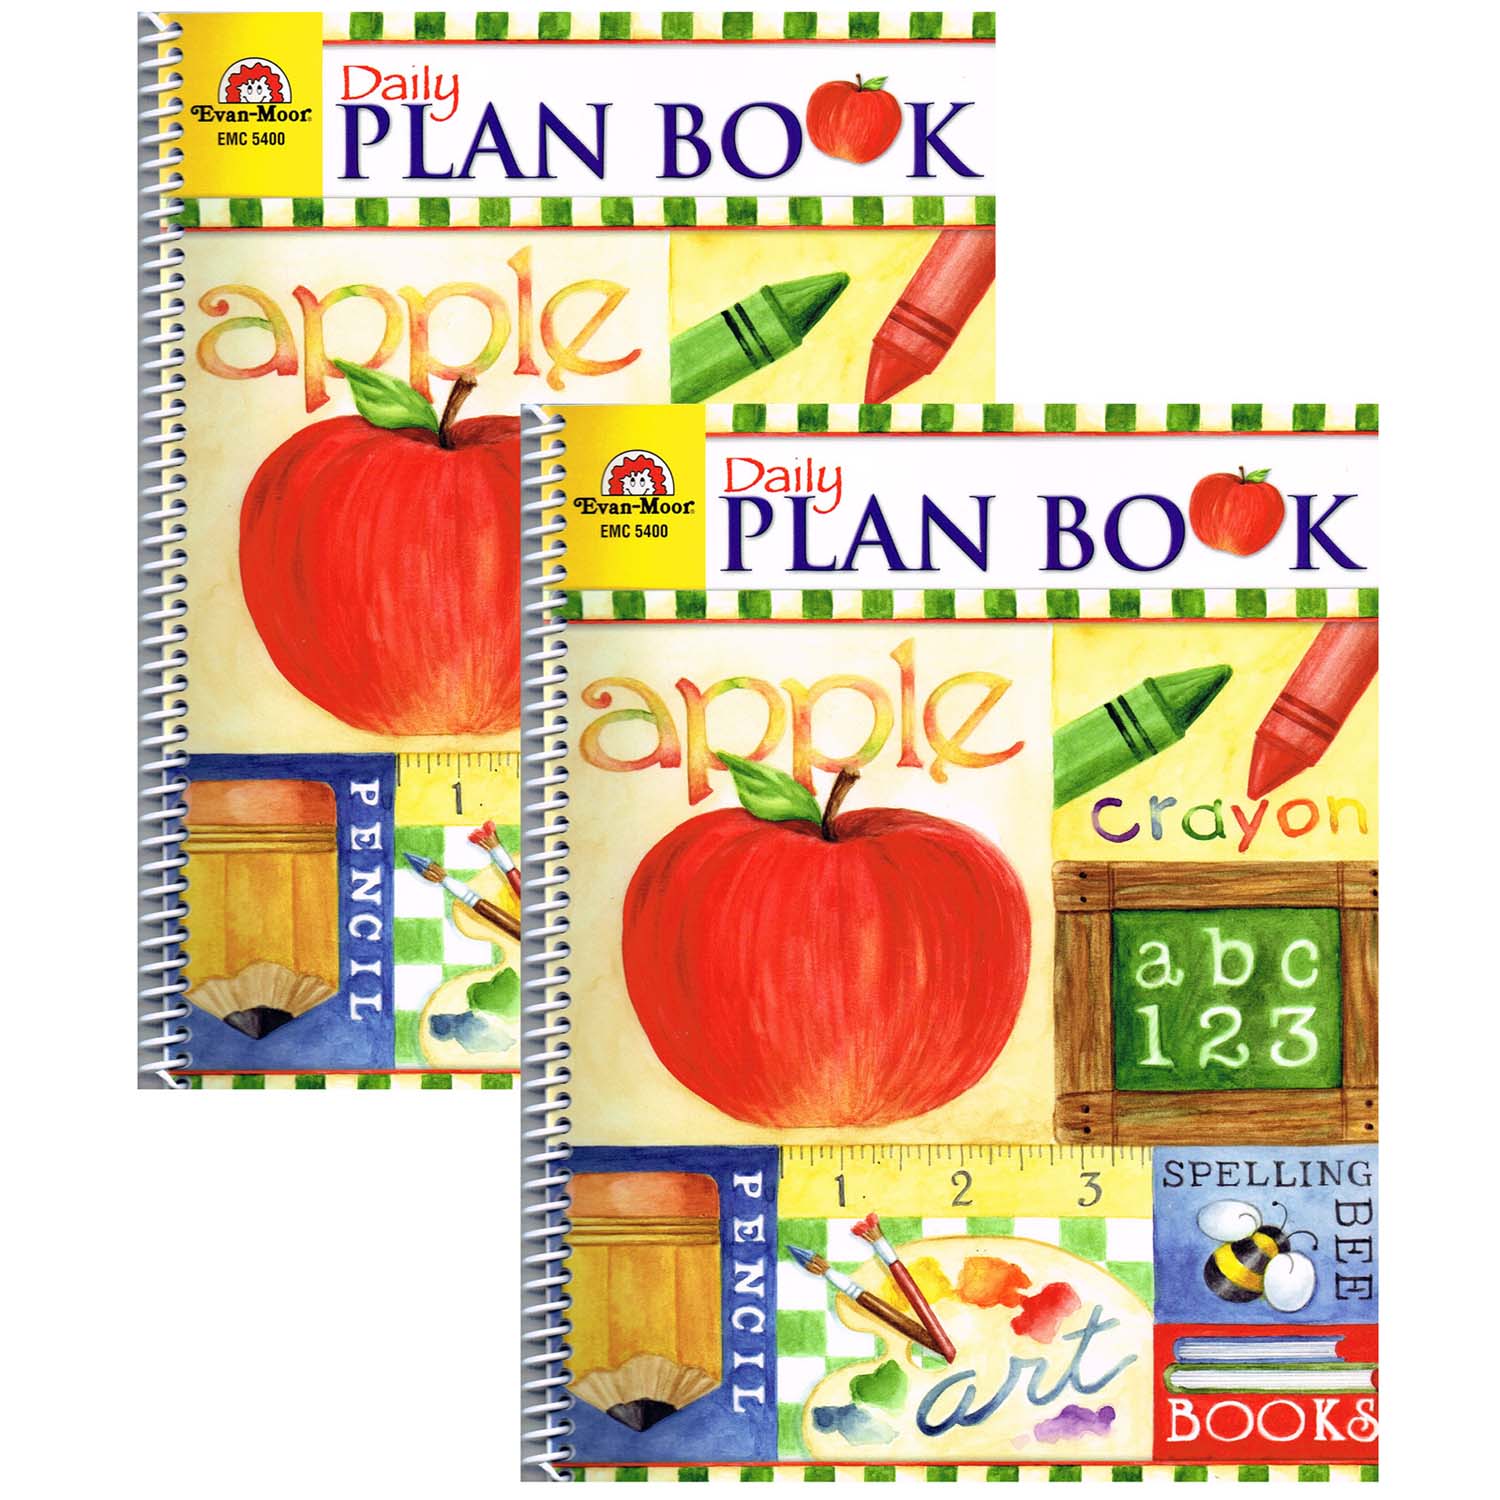 School Days Daily Plan Book, Pack of 2 - A1 School Supplies